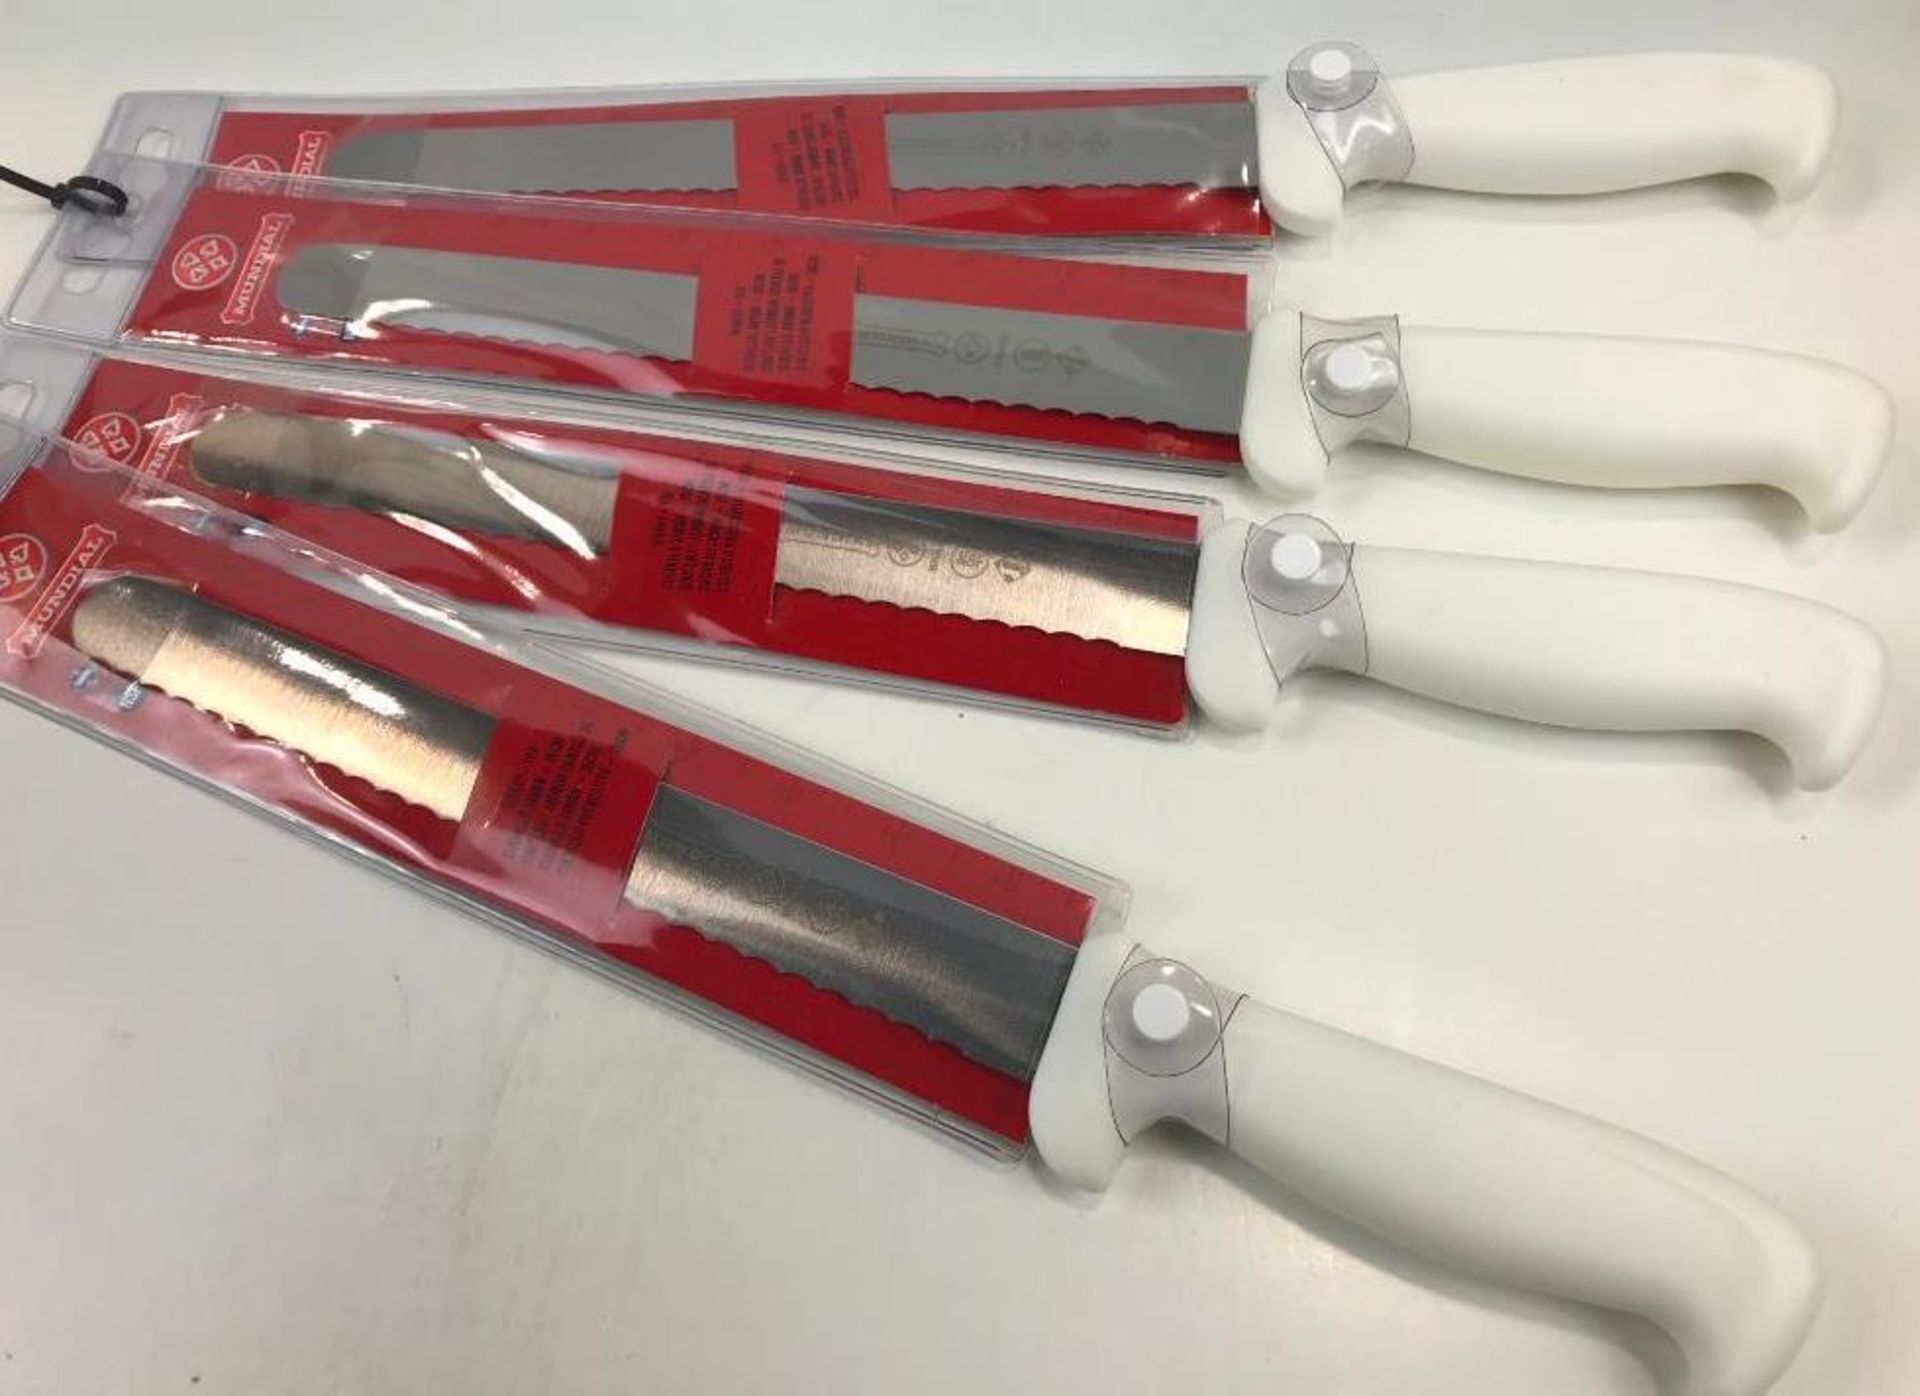 MUNDIAL 10" SLICING KNIVES, W5627-10 - LOT OF 4 - NEW